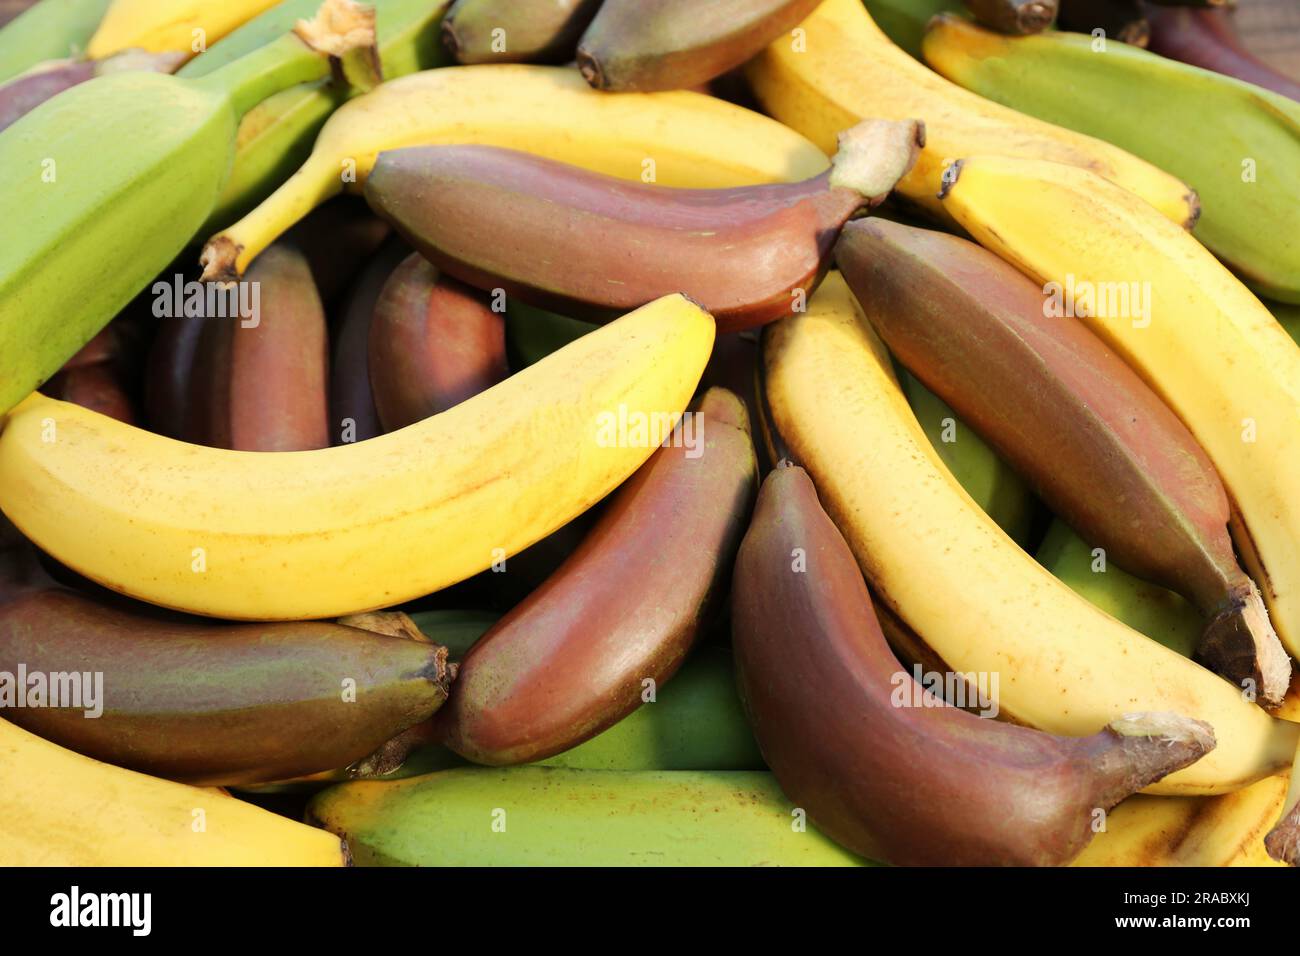 Different types of bananas as background, top view Stock Photo